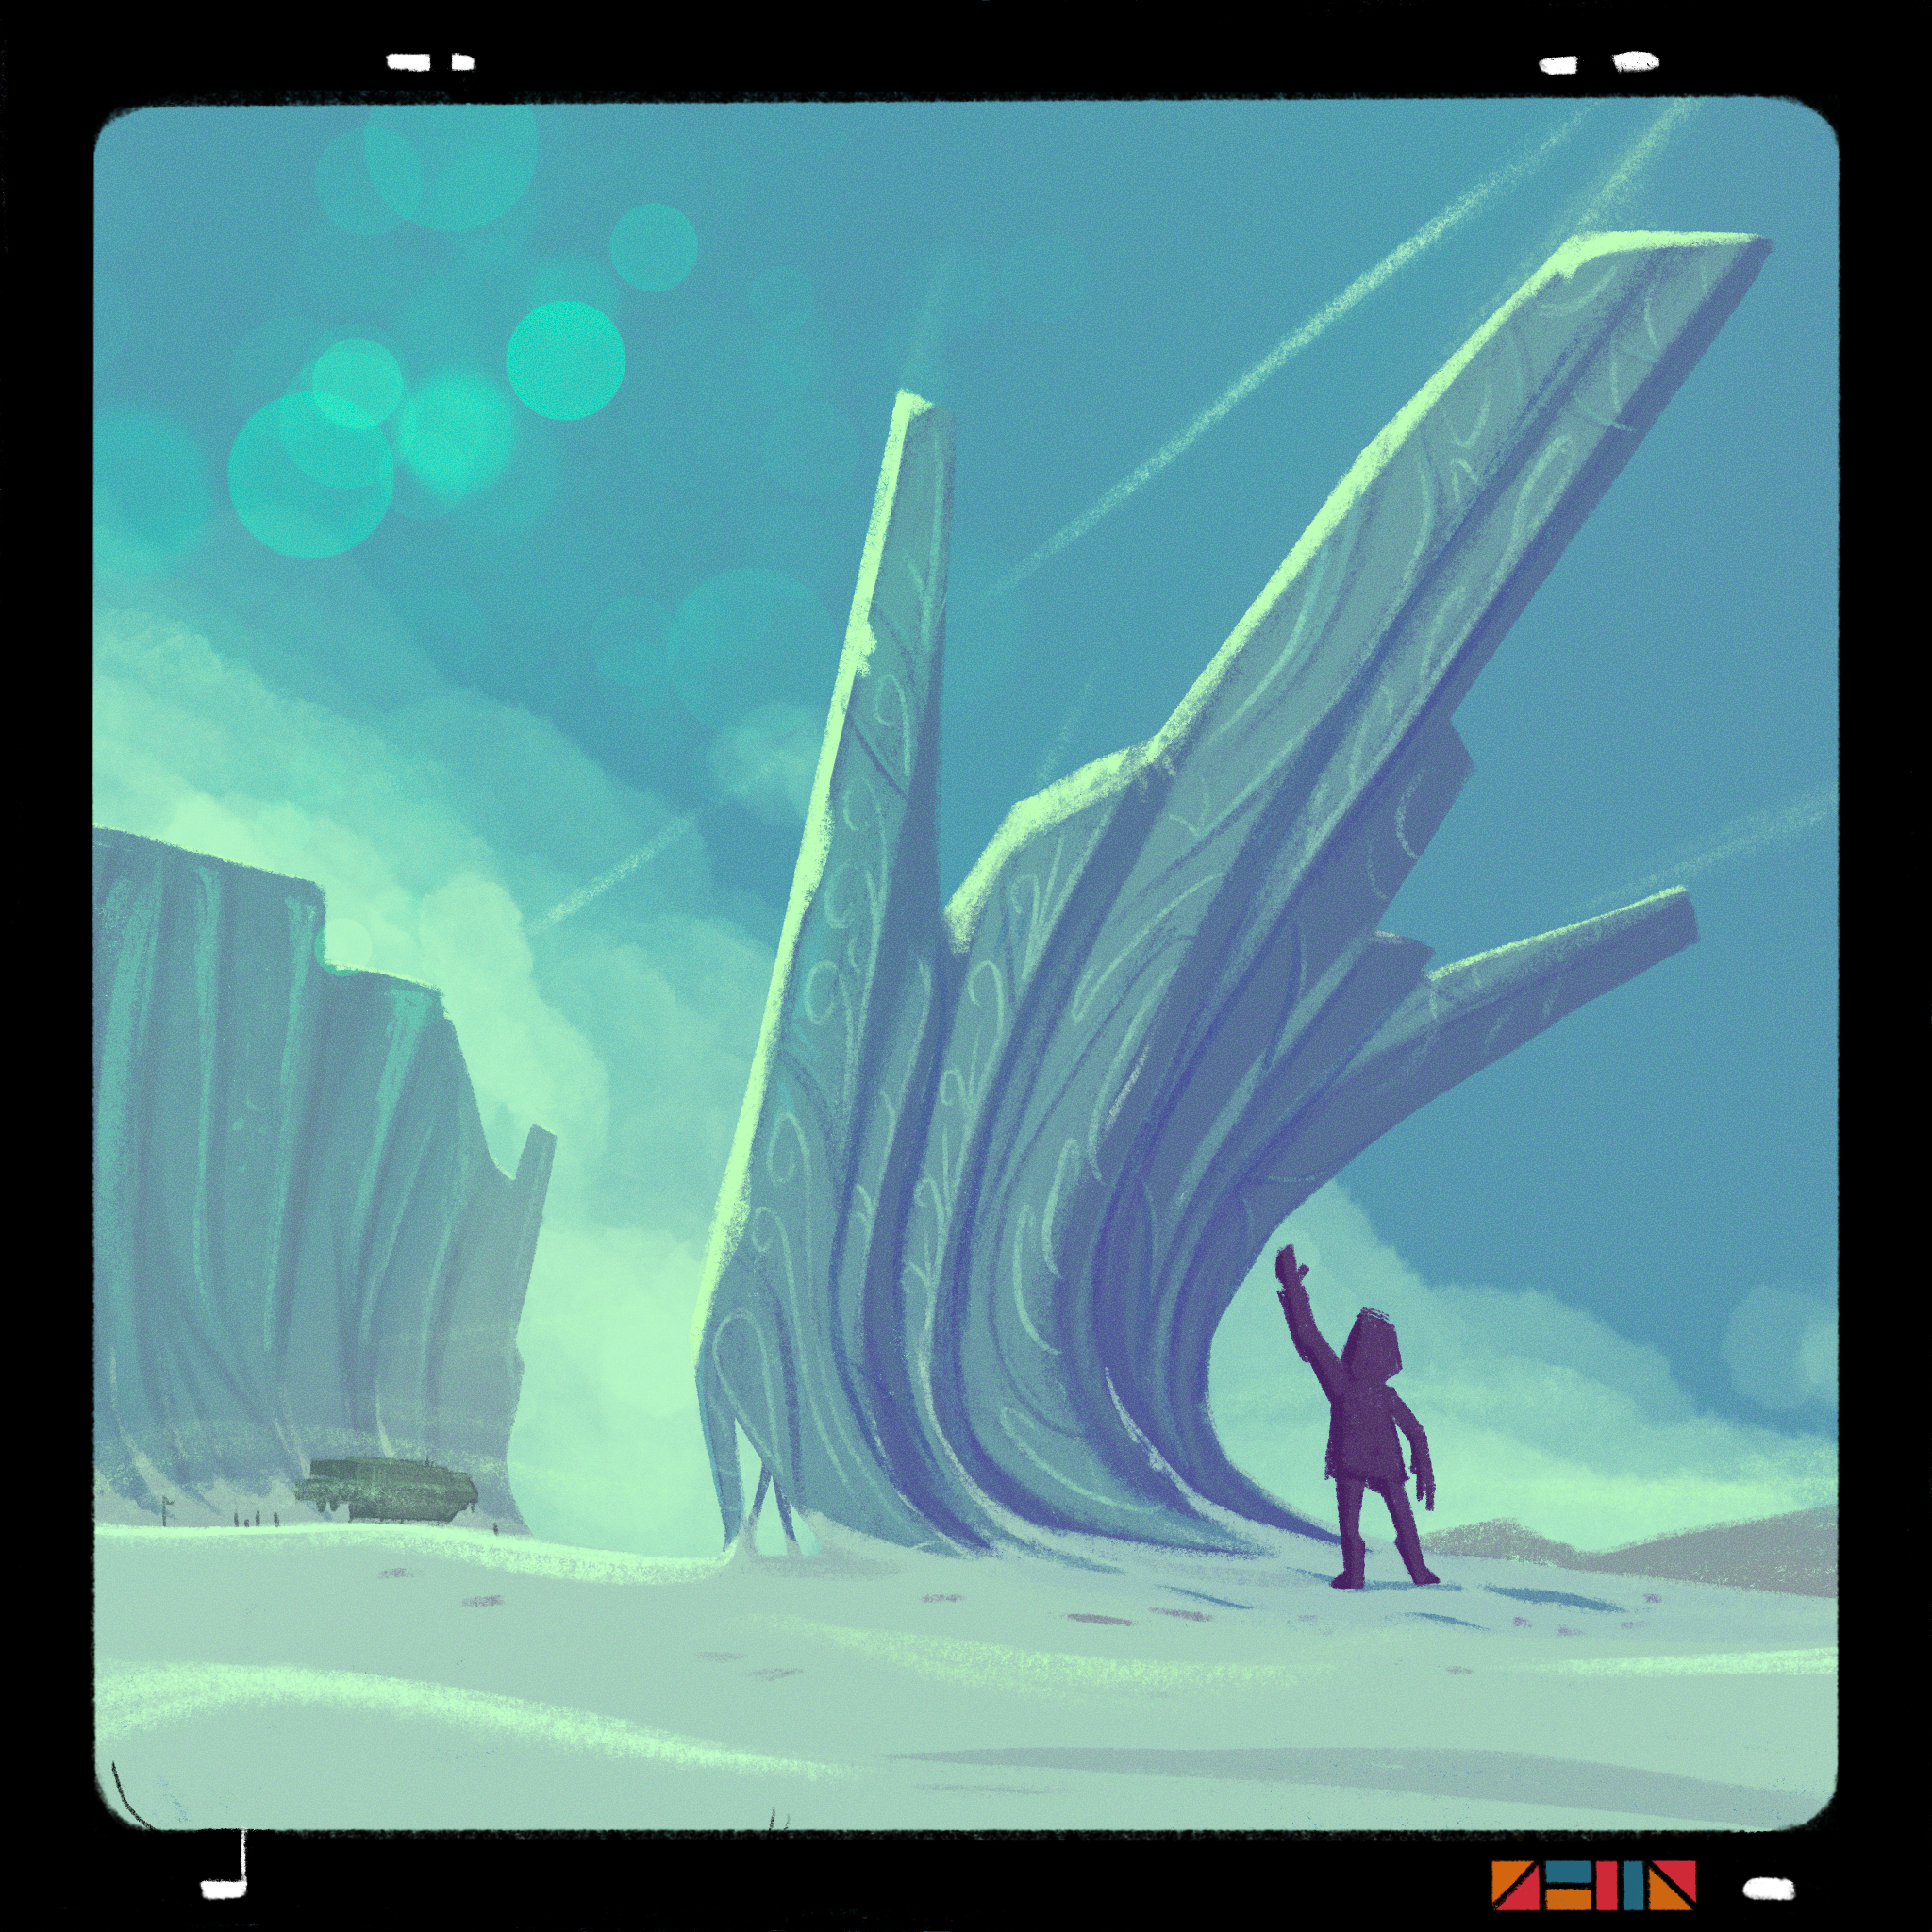 A digital drawing of an ice sculpture made of curving tubes under a cold, blue sky. A person stands next to the sculpture, very small in comparison.